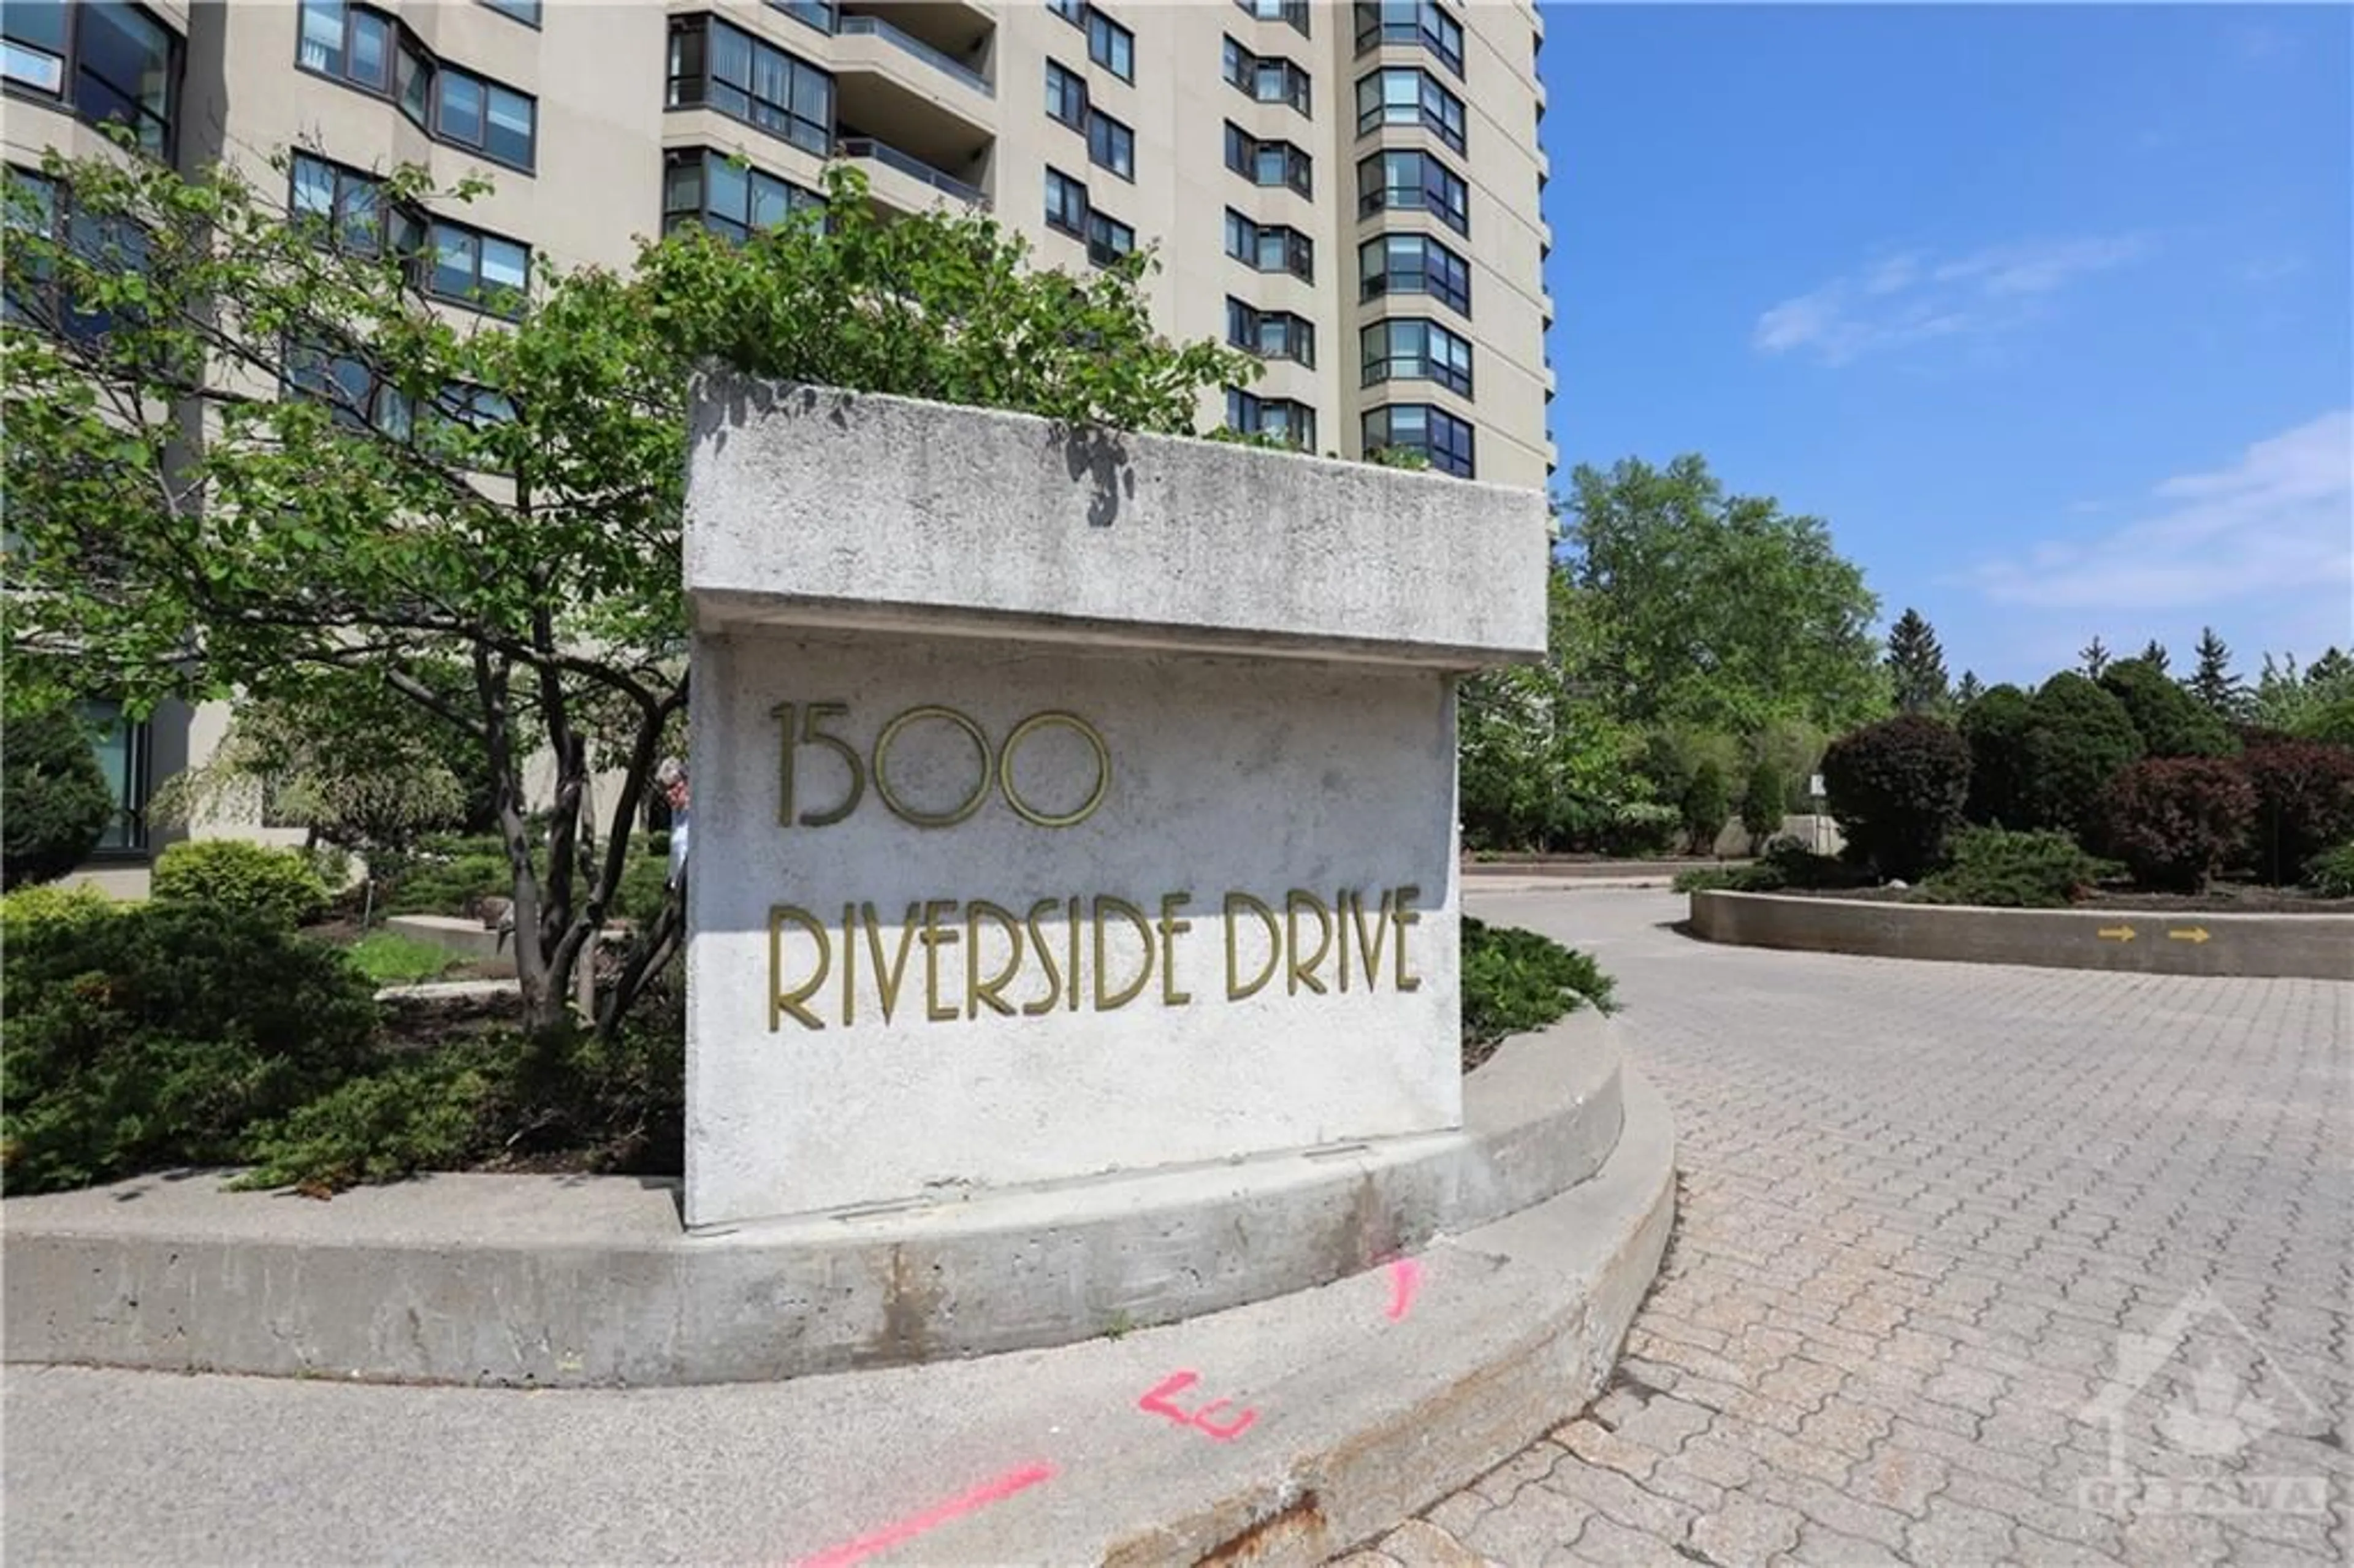 A pic from exterior of the house or condo for 1500 RIVERSIDE Dr #407, Ottawa Ontario K1G 4J4